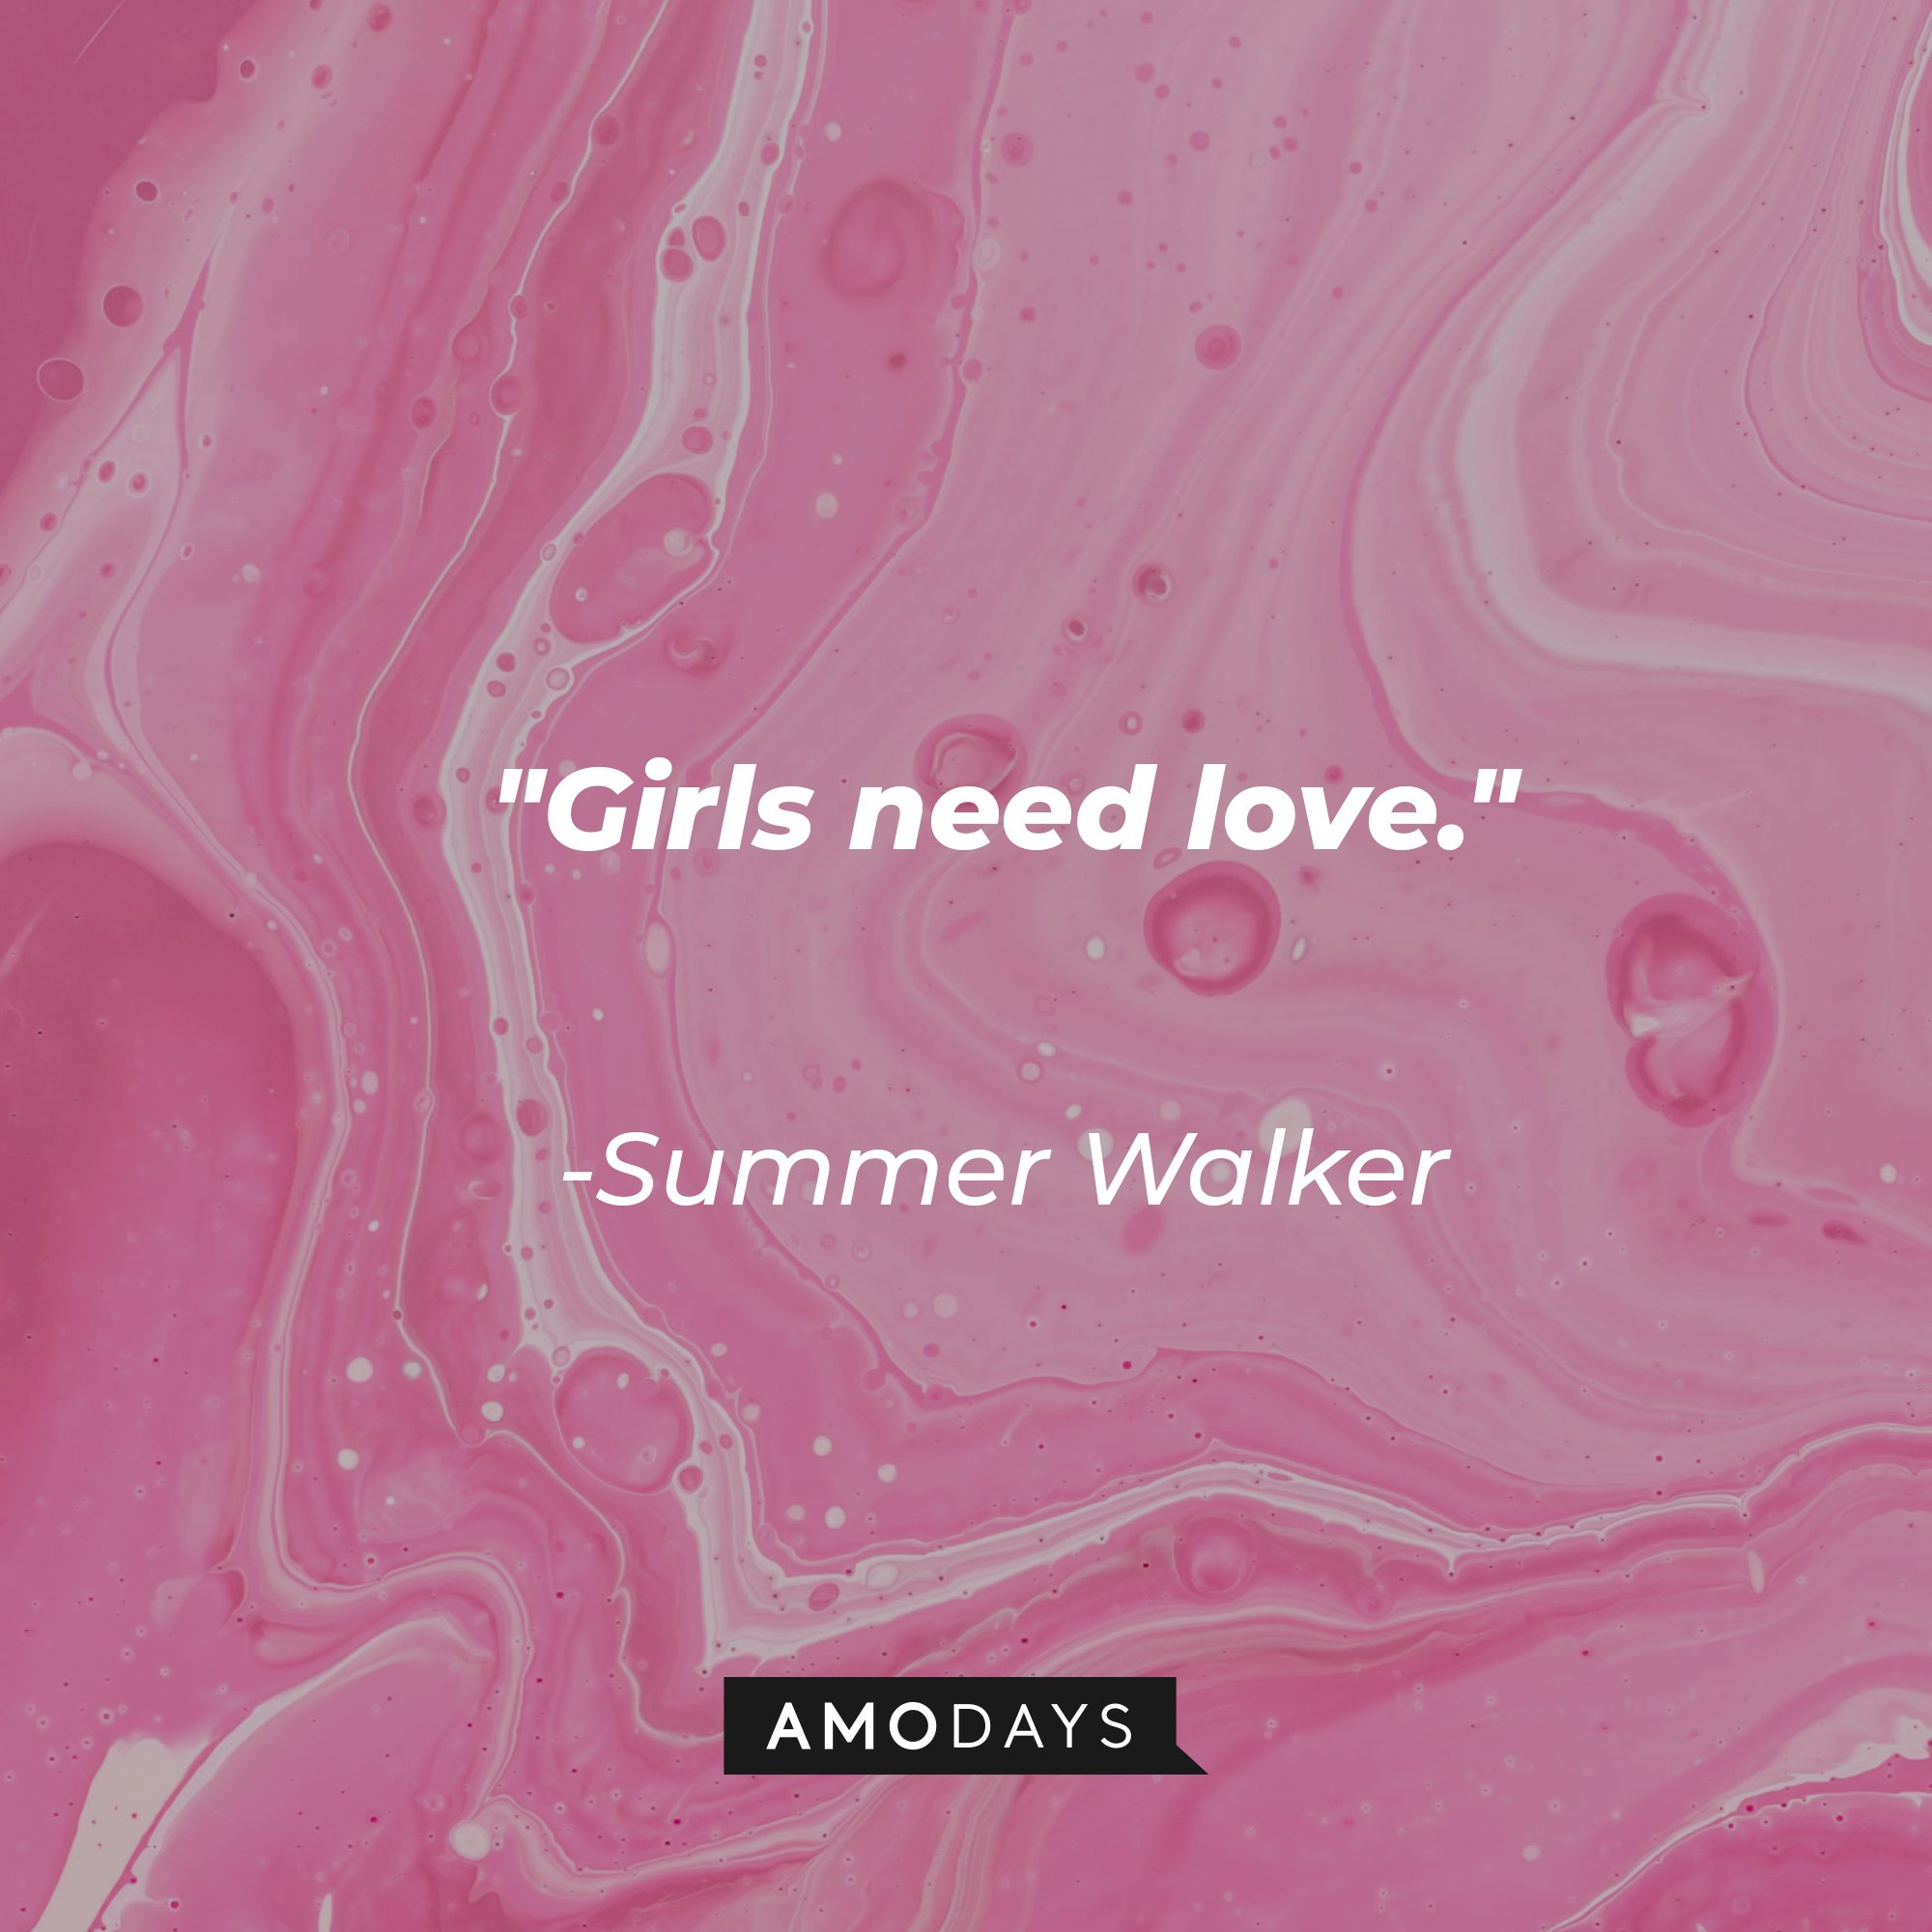 Summer Walker's quote: "Girls need love." | Image: AmoDays